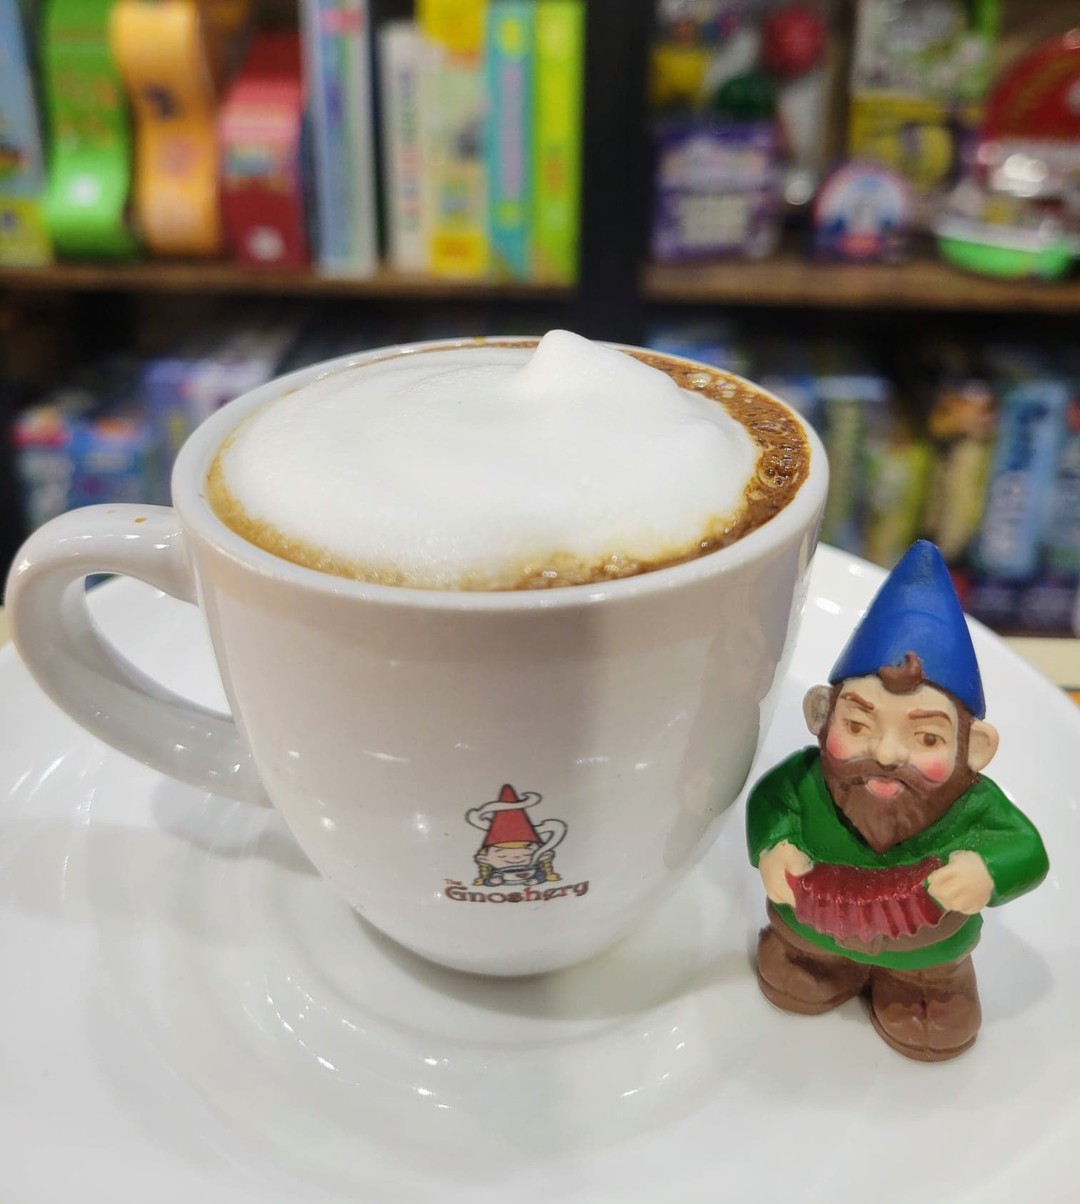 In a rush but need some caffeine? No problem! Simply stop in at The Gnoshery to order your expresso or macchiato: we will have you in and out lickety-split! The drink featured in the picture is a Banana Macchiato!

#TheGnoshery #GnomeGames #latte #coffee #tea